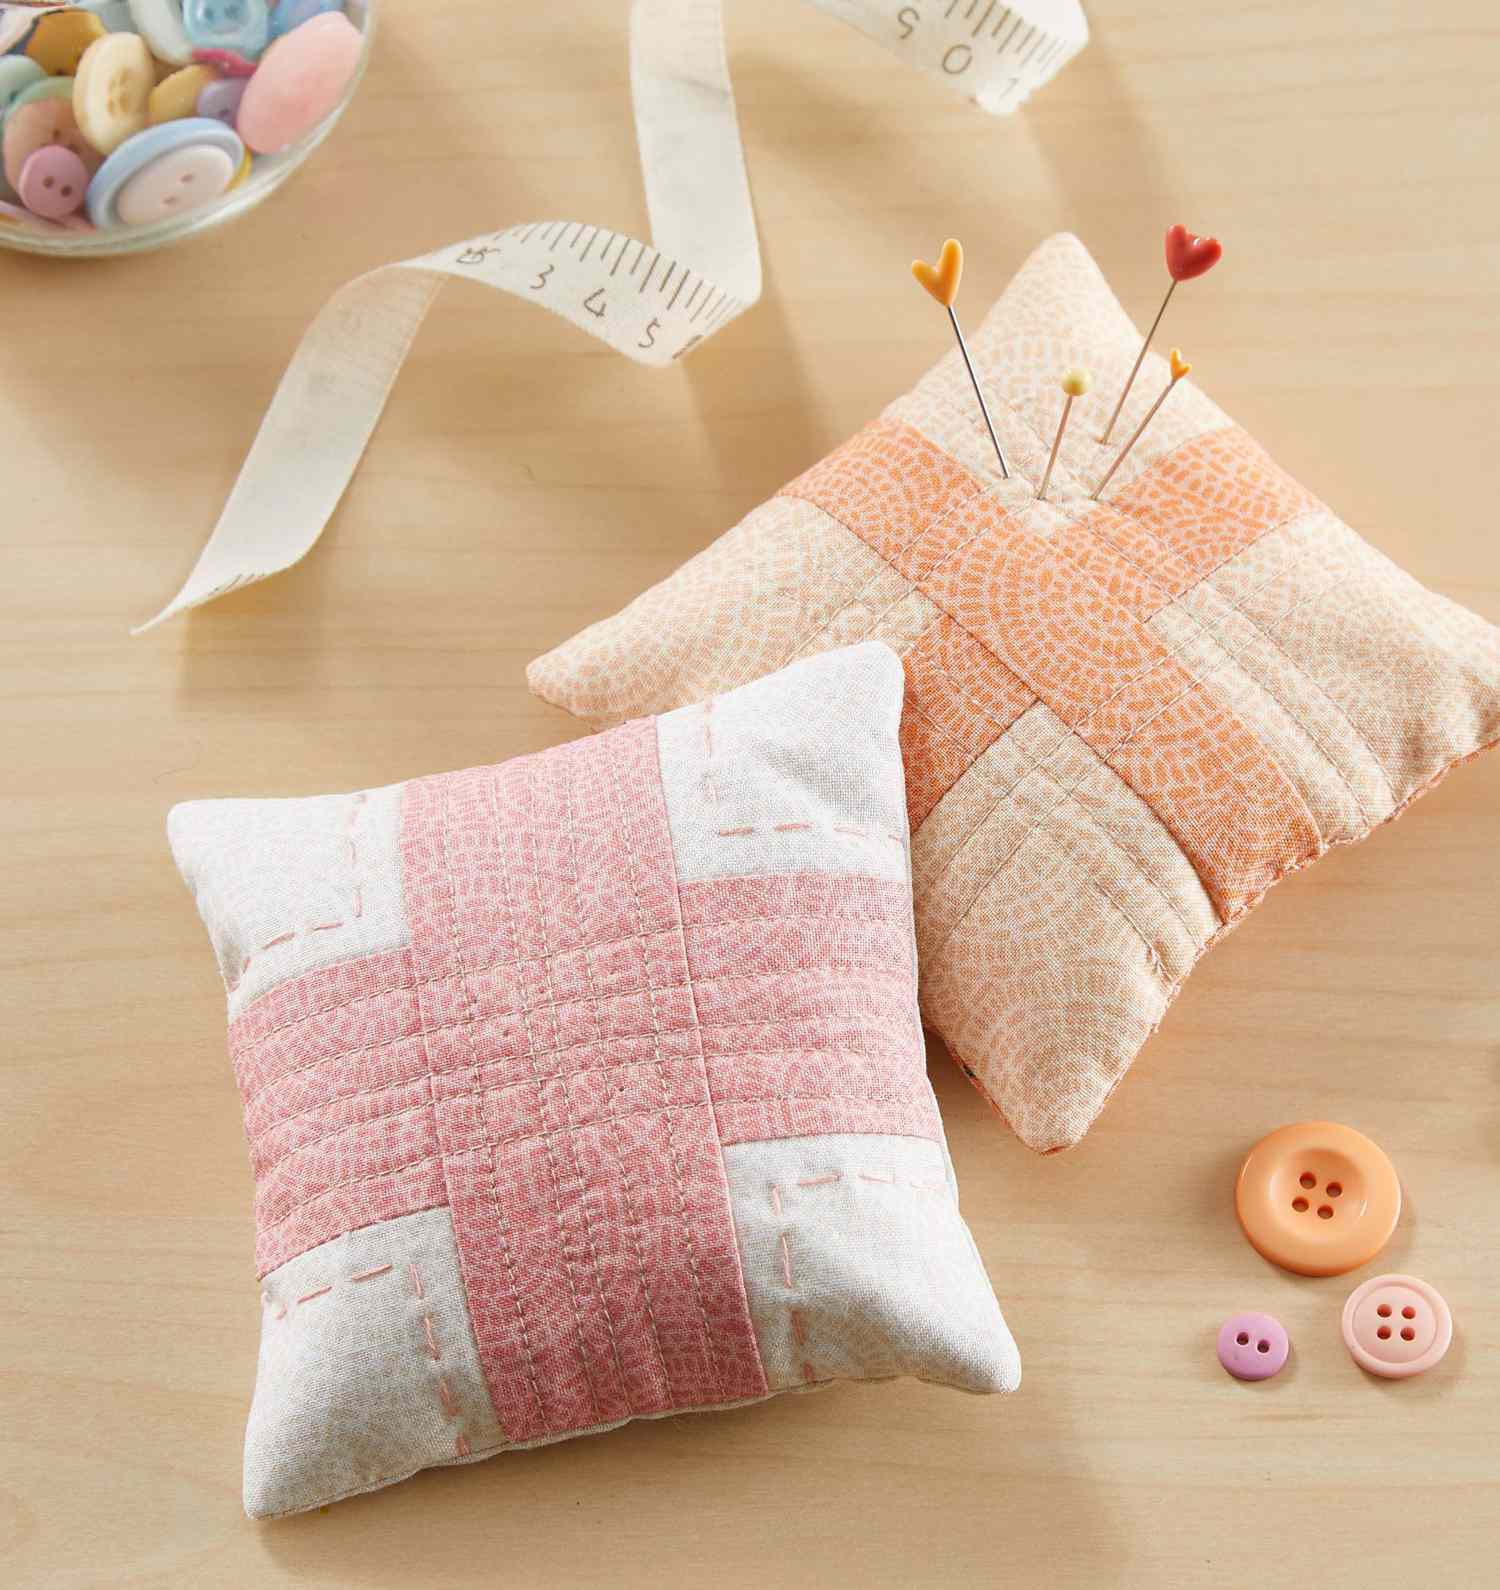 Floral Print Cotton Pin Cushion DIY Cross Stitch Sewing Needlework Needle Pillow MZY1188 Pincushion with Wooden Base 